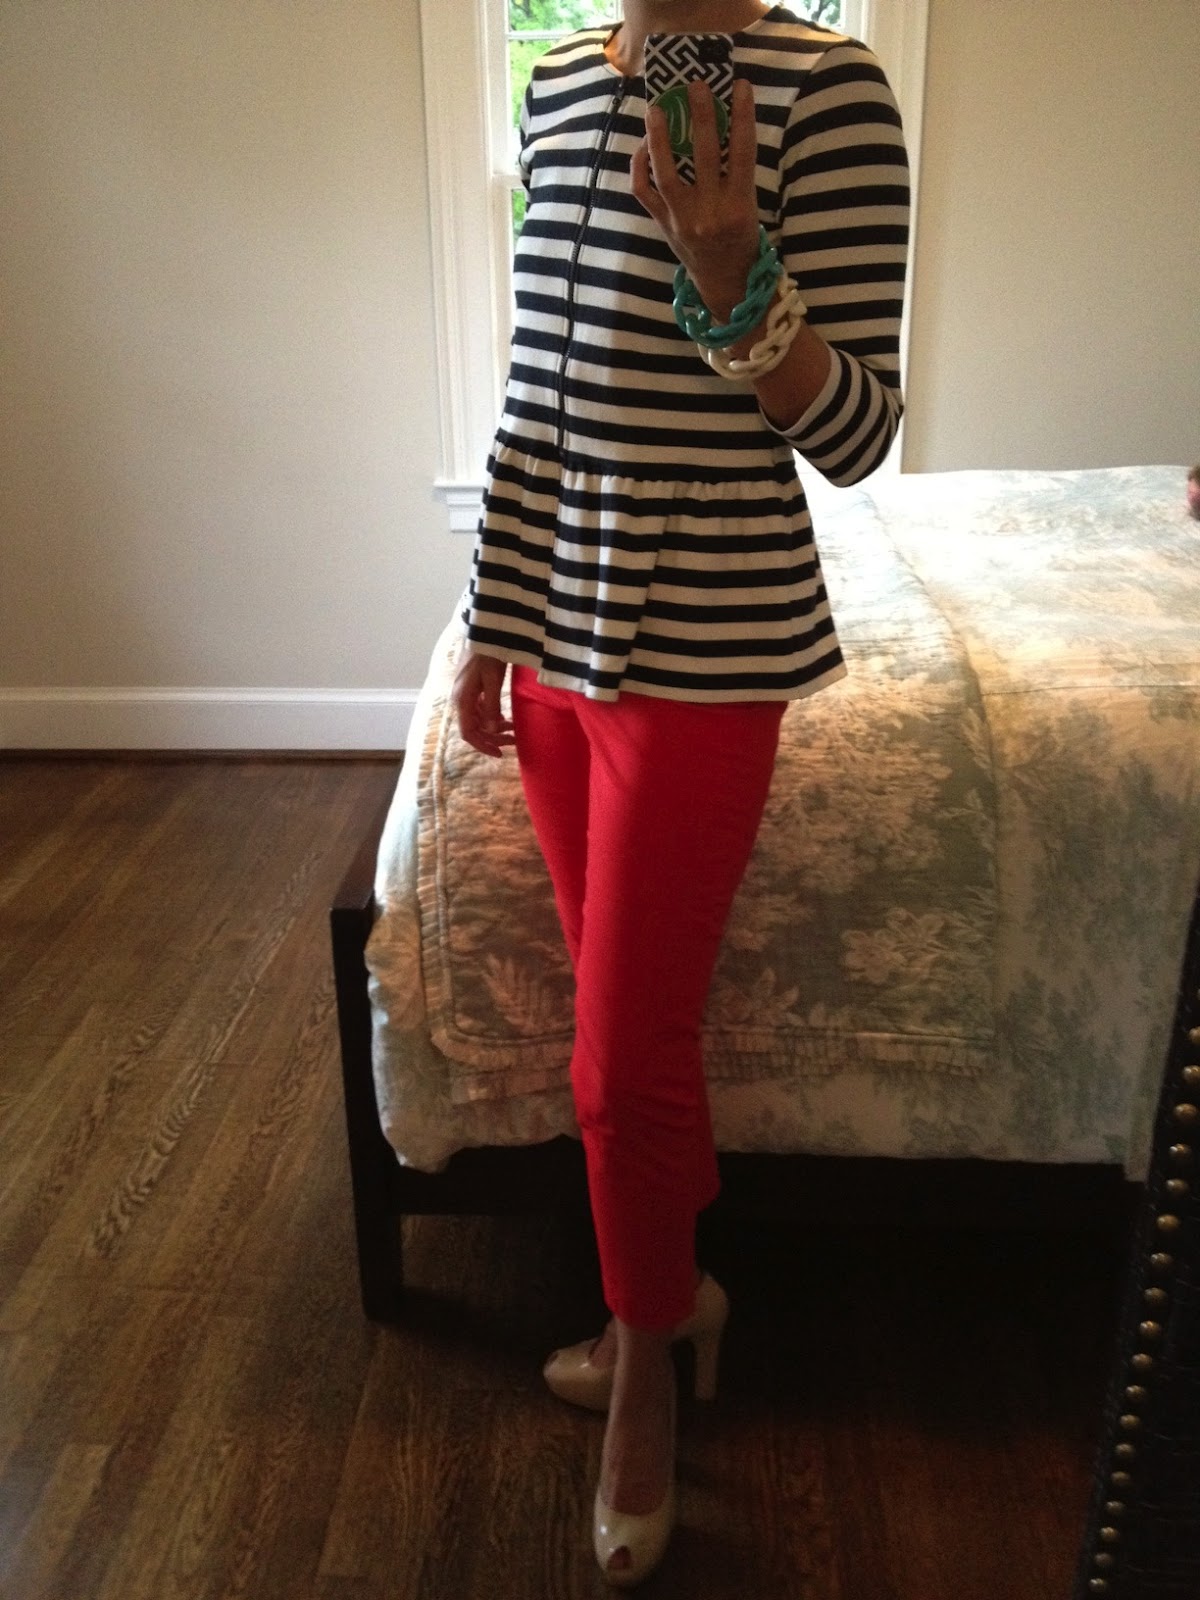 Cardigans and Couture: What I Wore - Stripes and Peplum